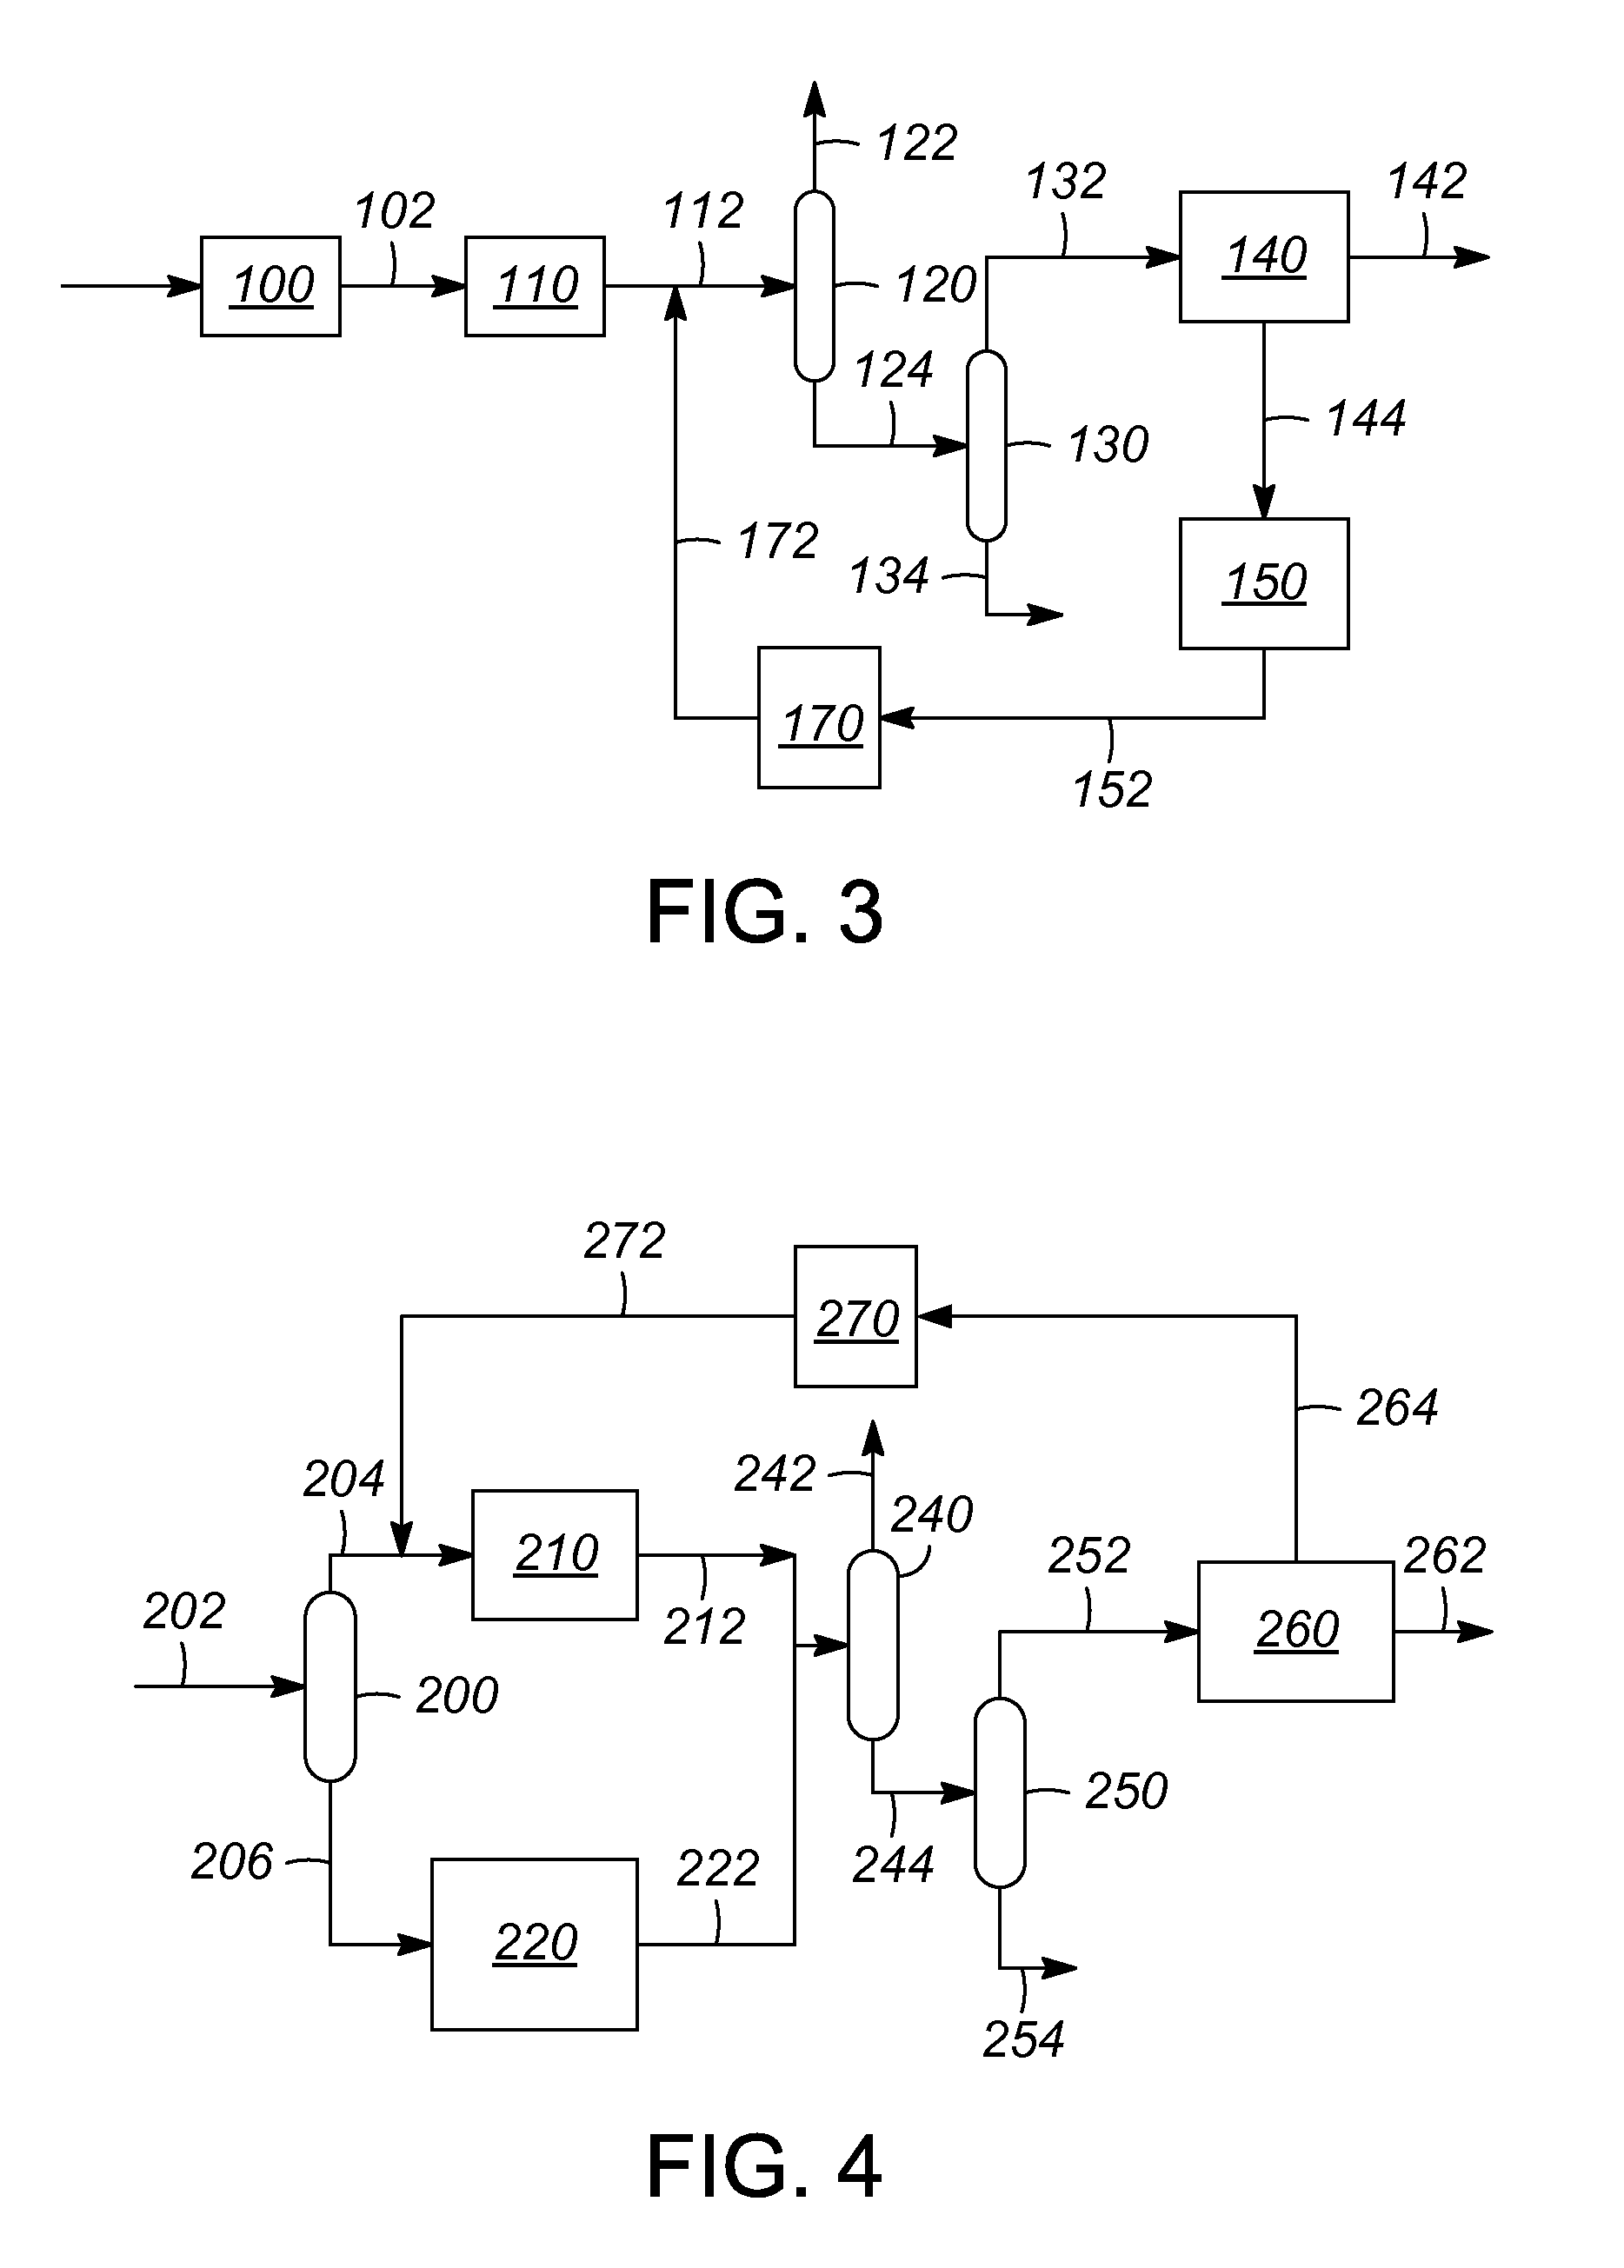 Process for increasing benzene and toluene production